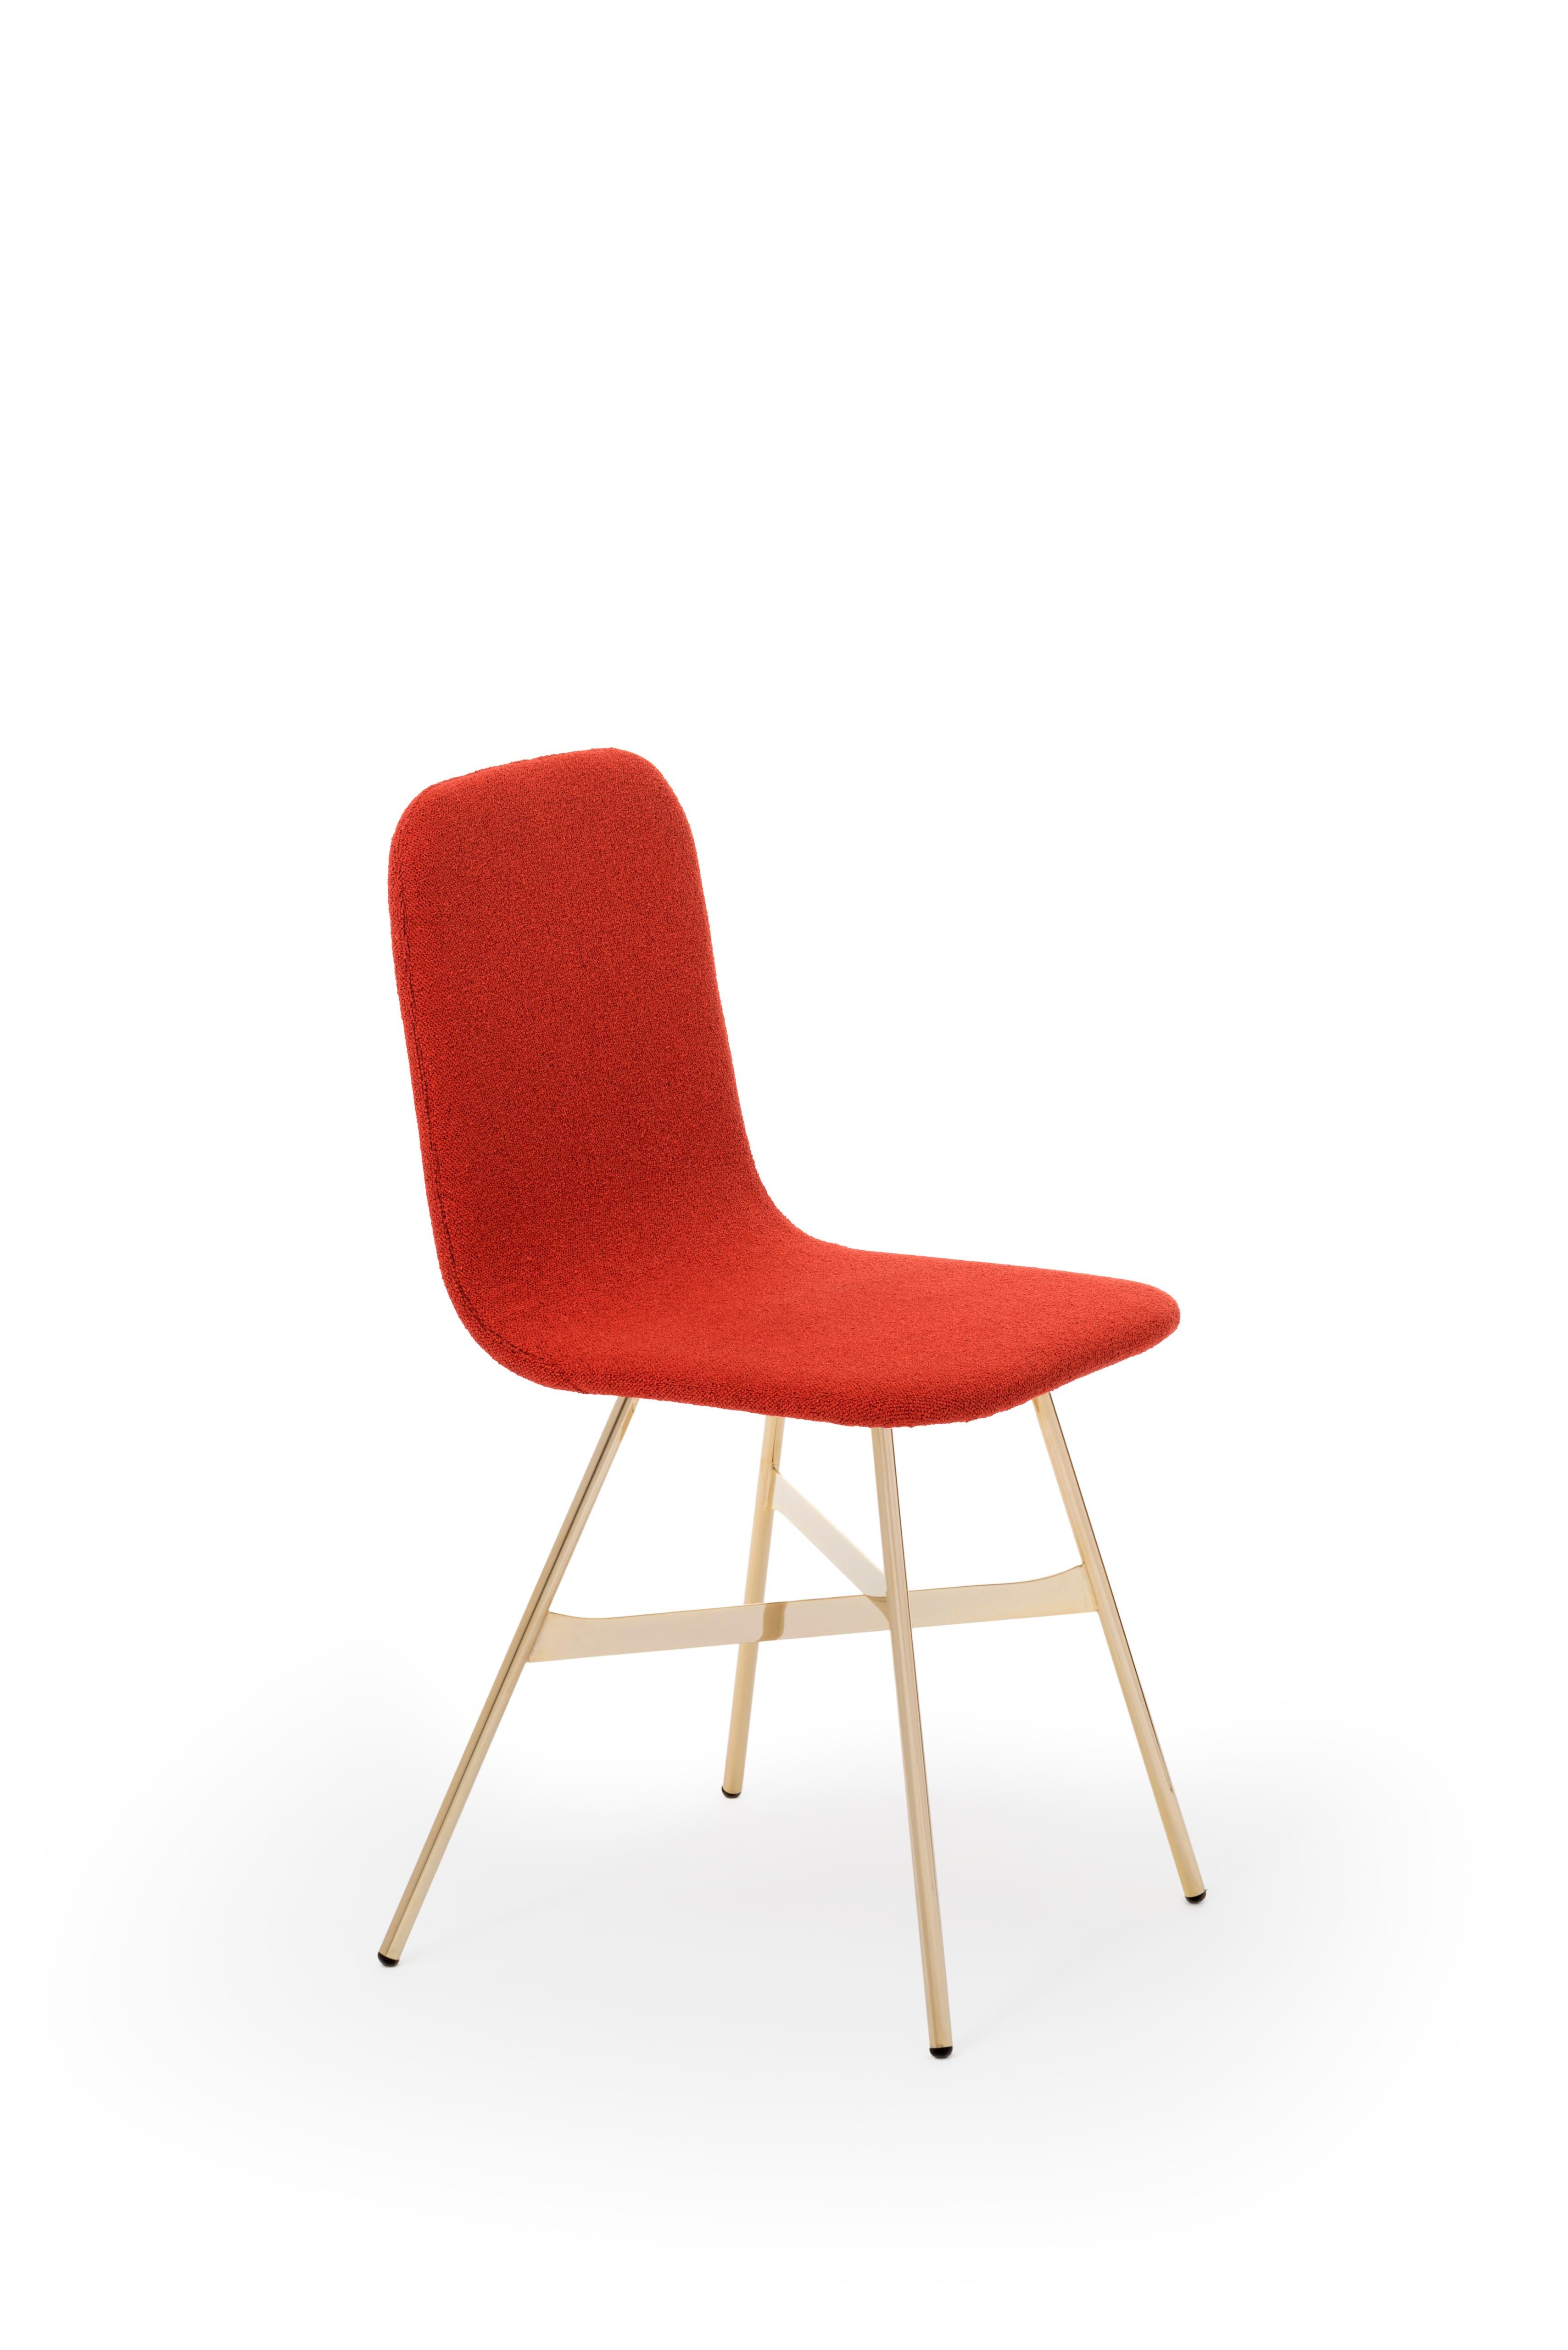 Contemporary Tria Simple Chair, Golden Legs, Minimalist Design Icon Inspired to Graphic Art For Sale